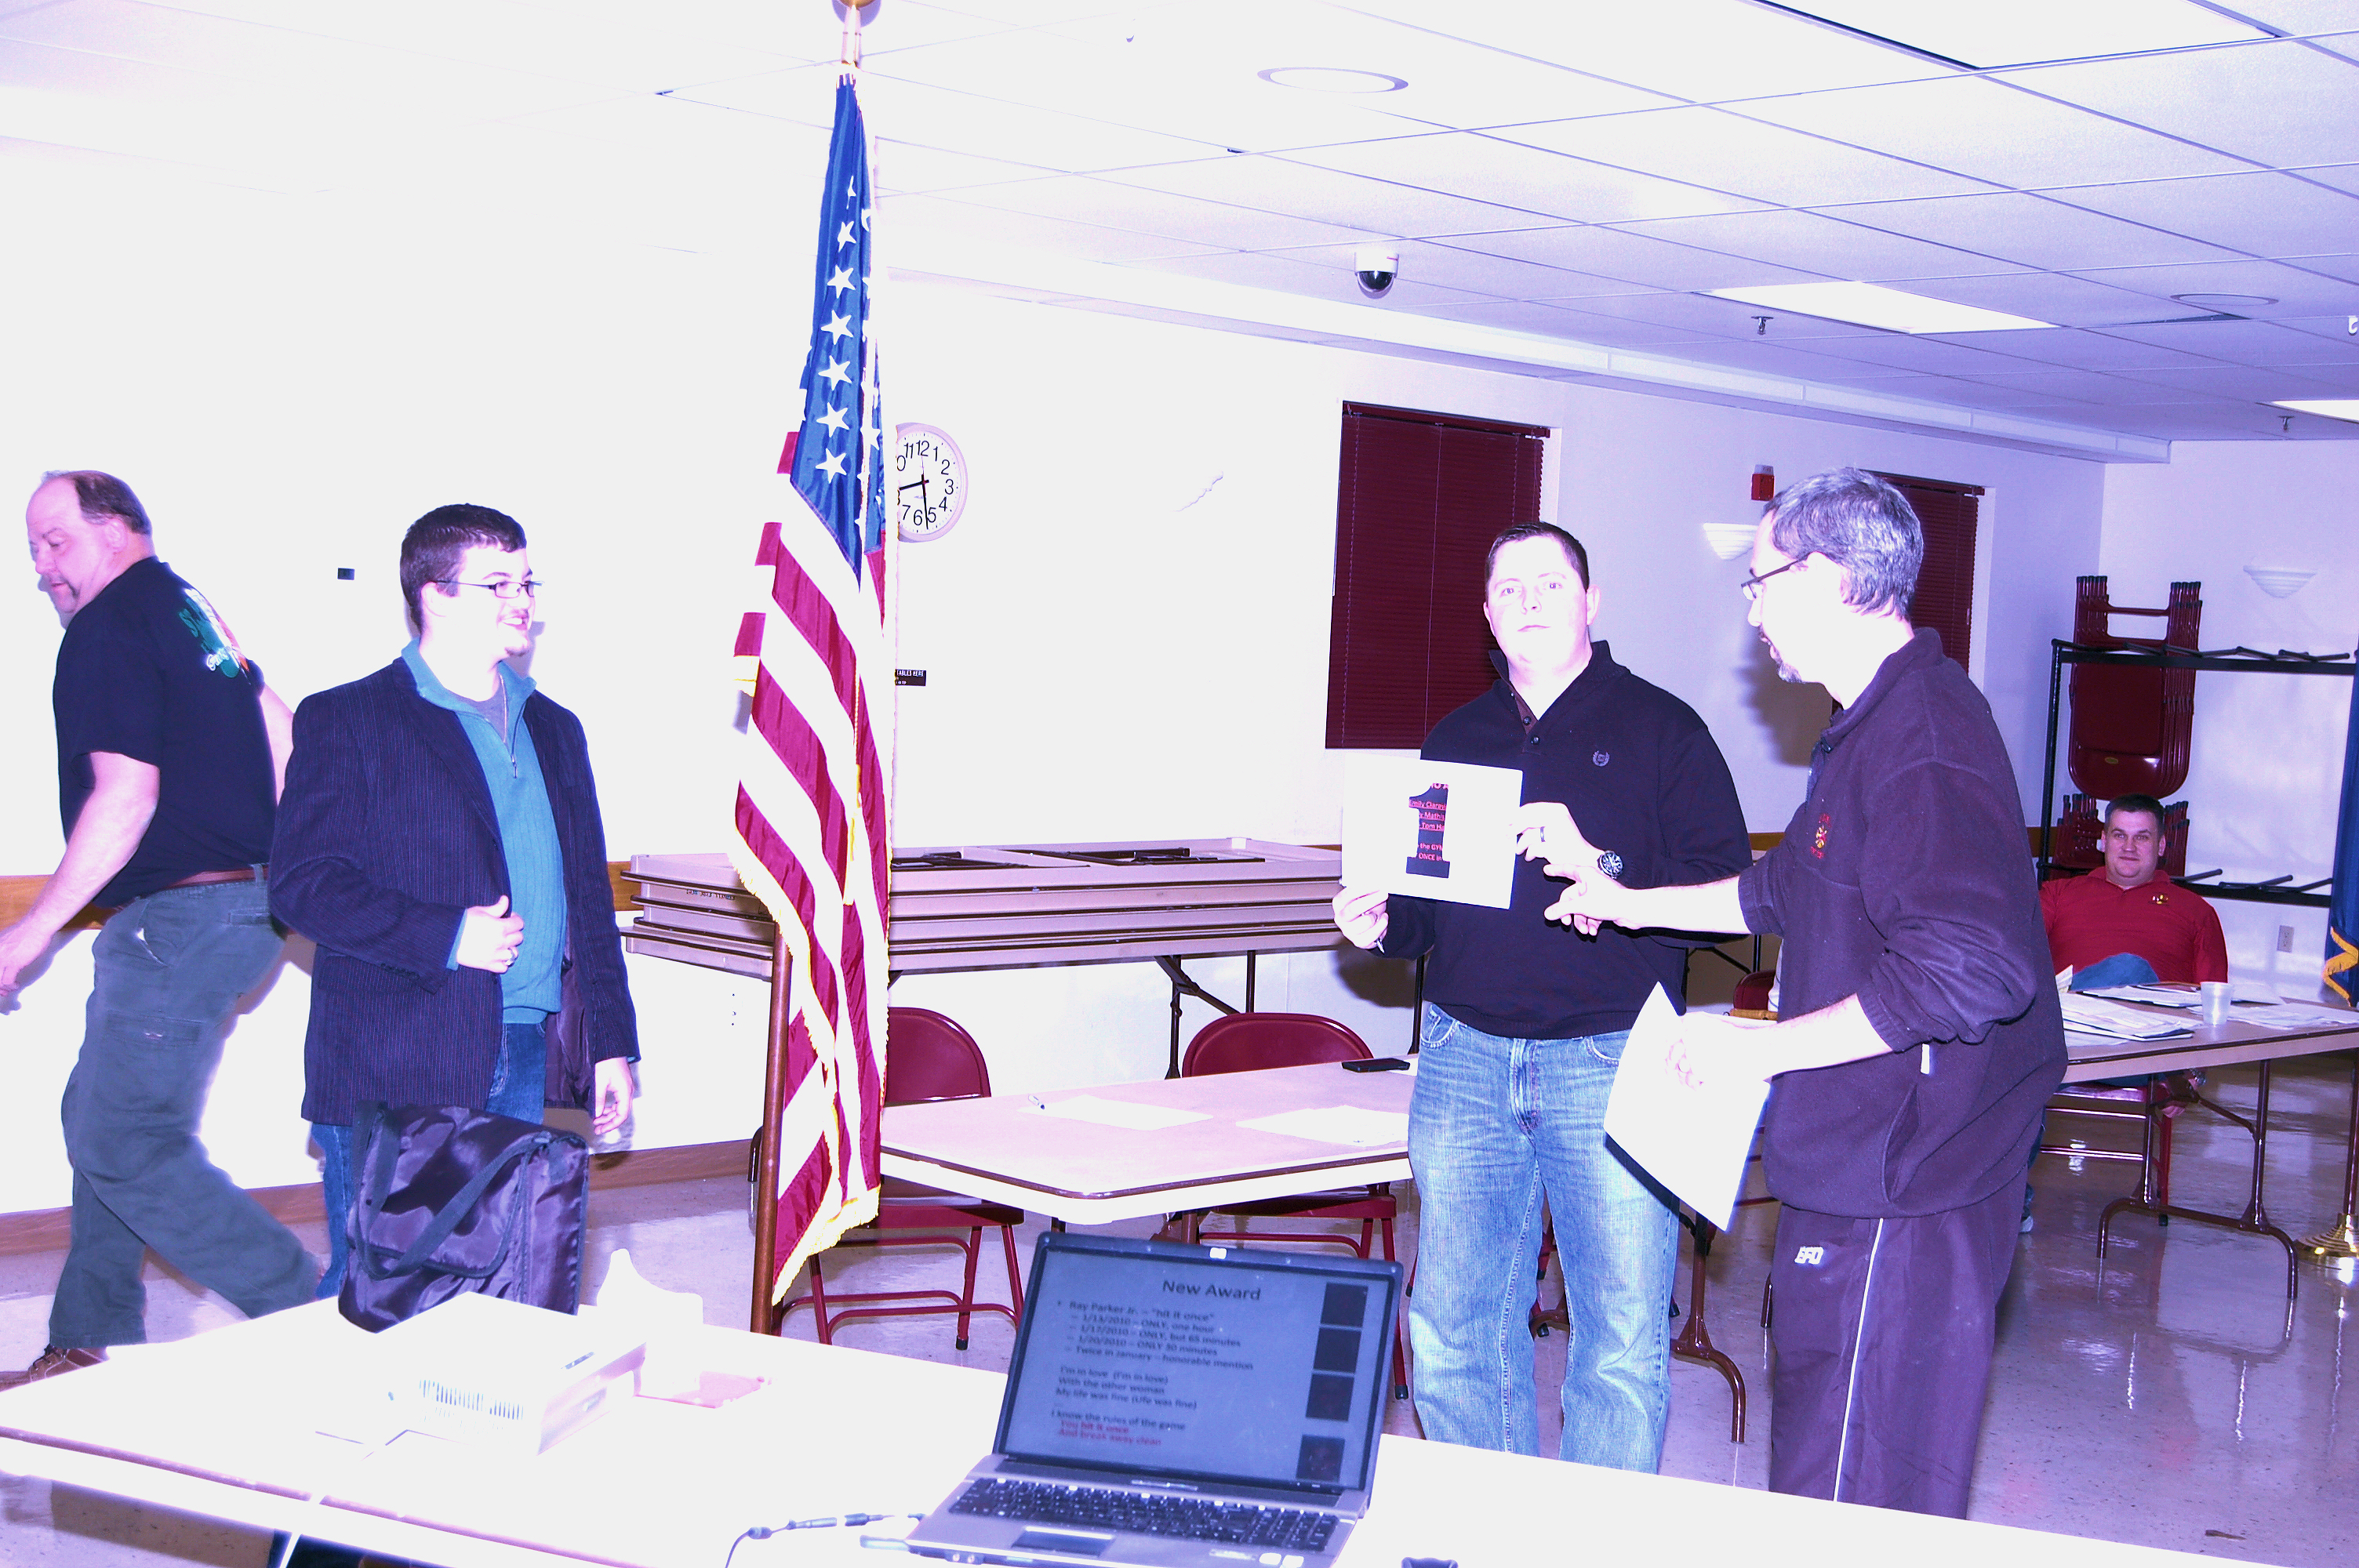 01-08-11  Other - Annual Meeting